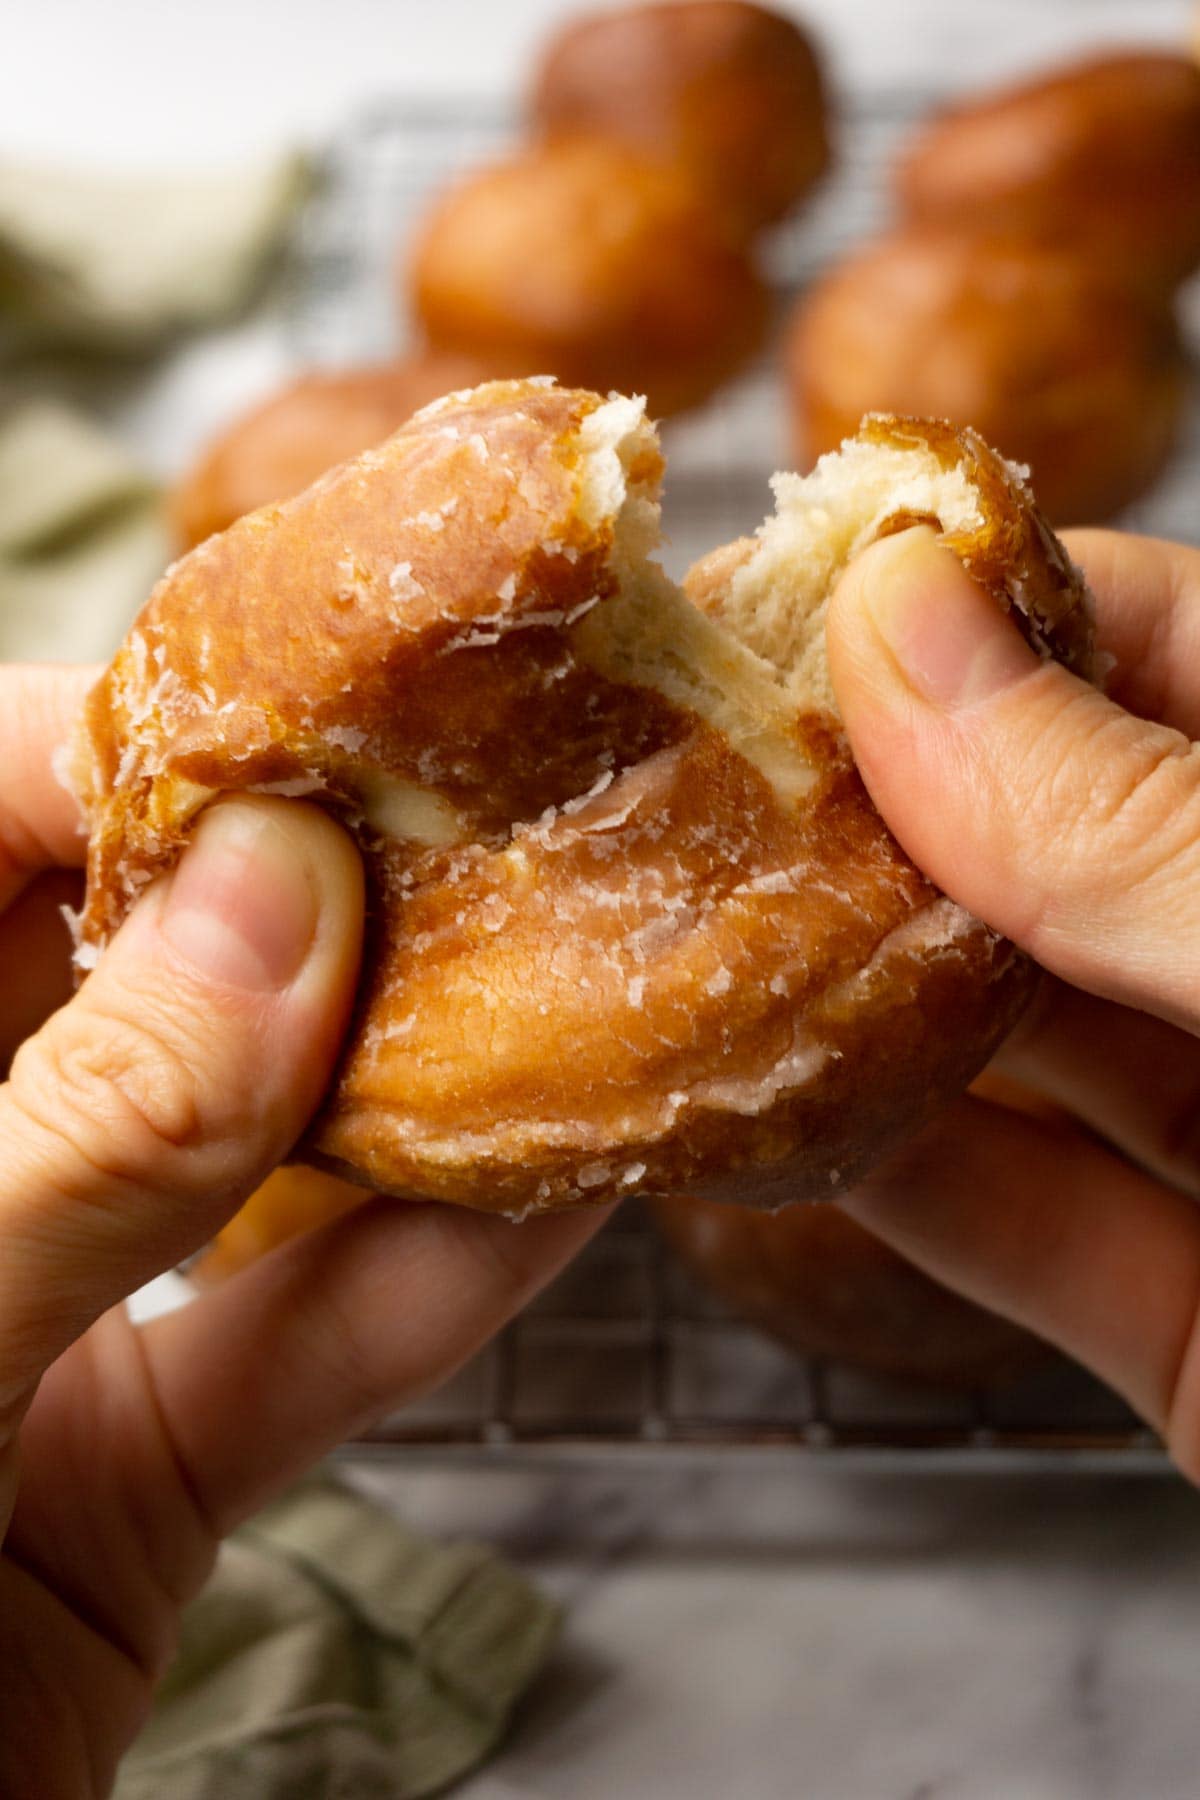 A hand is ripping apart a donut hole covered in sugar glaze.